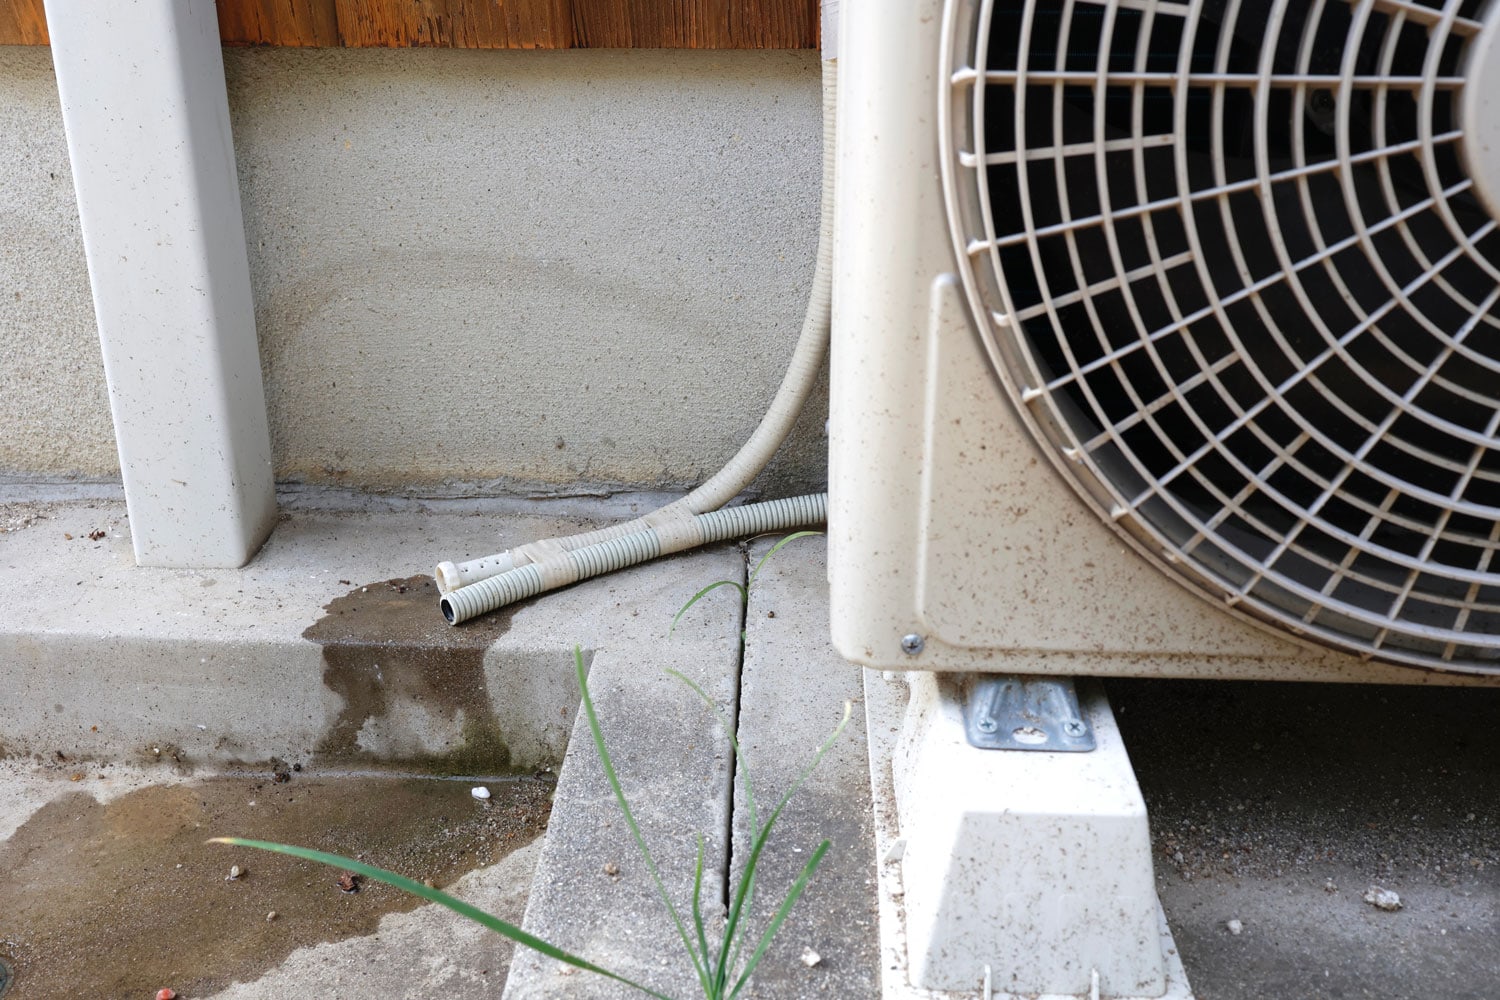 A window air conditioning hose leaking water due to condensation inside the AC